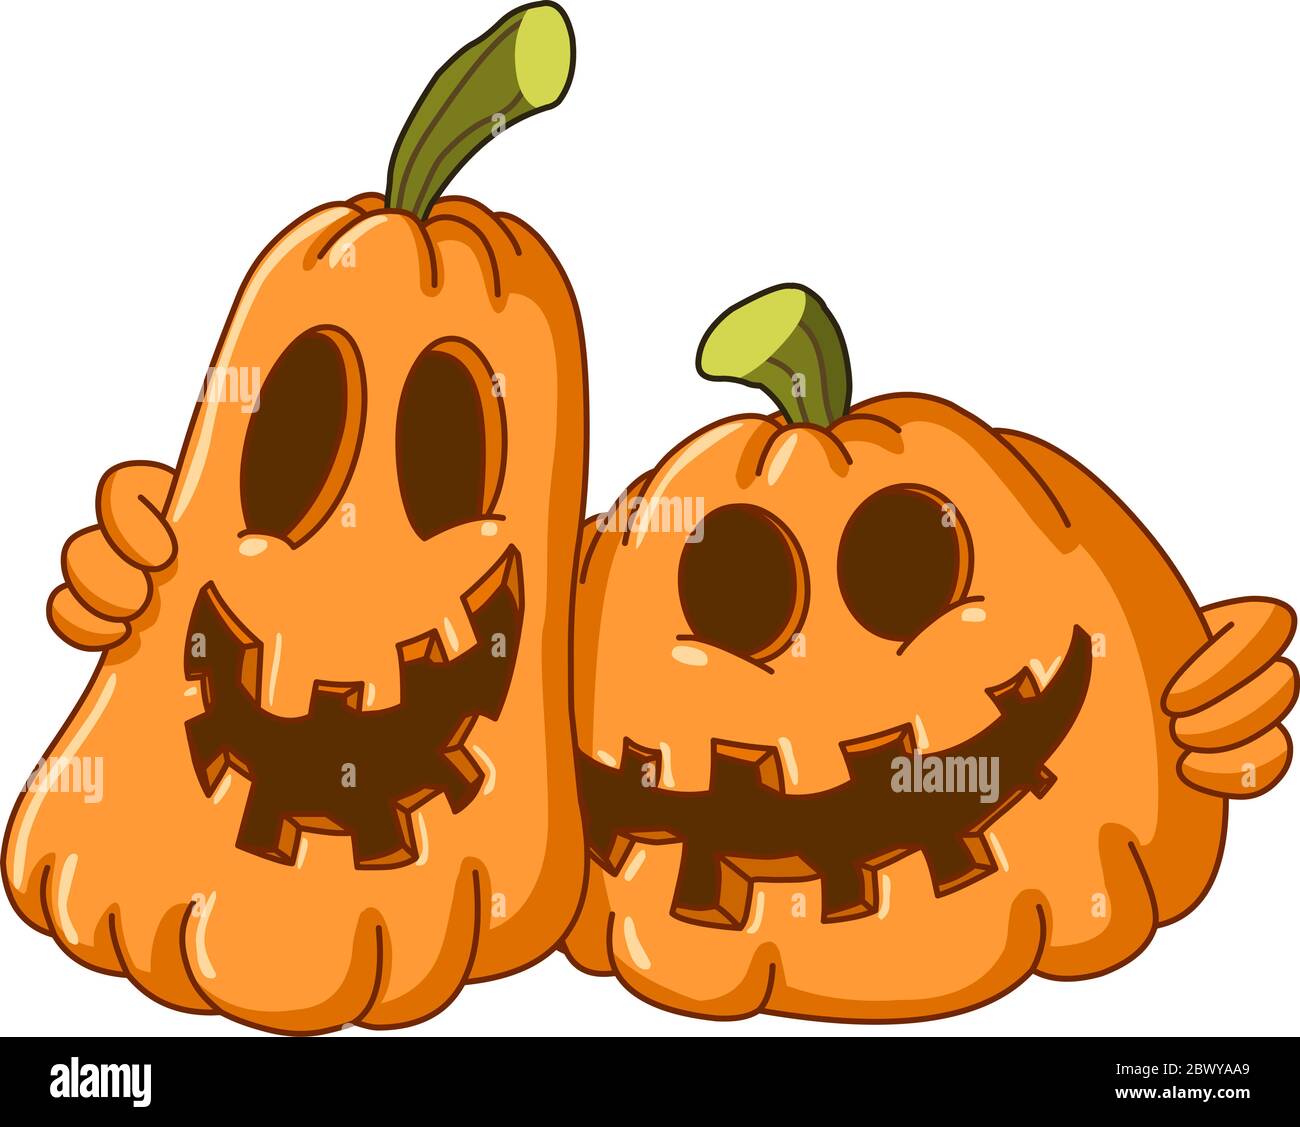 Two pumpkins hugging each other Stock Vector